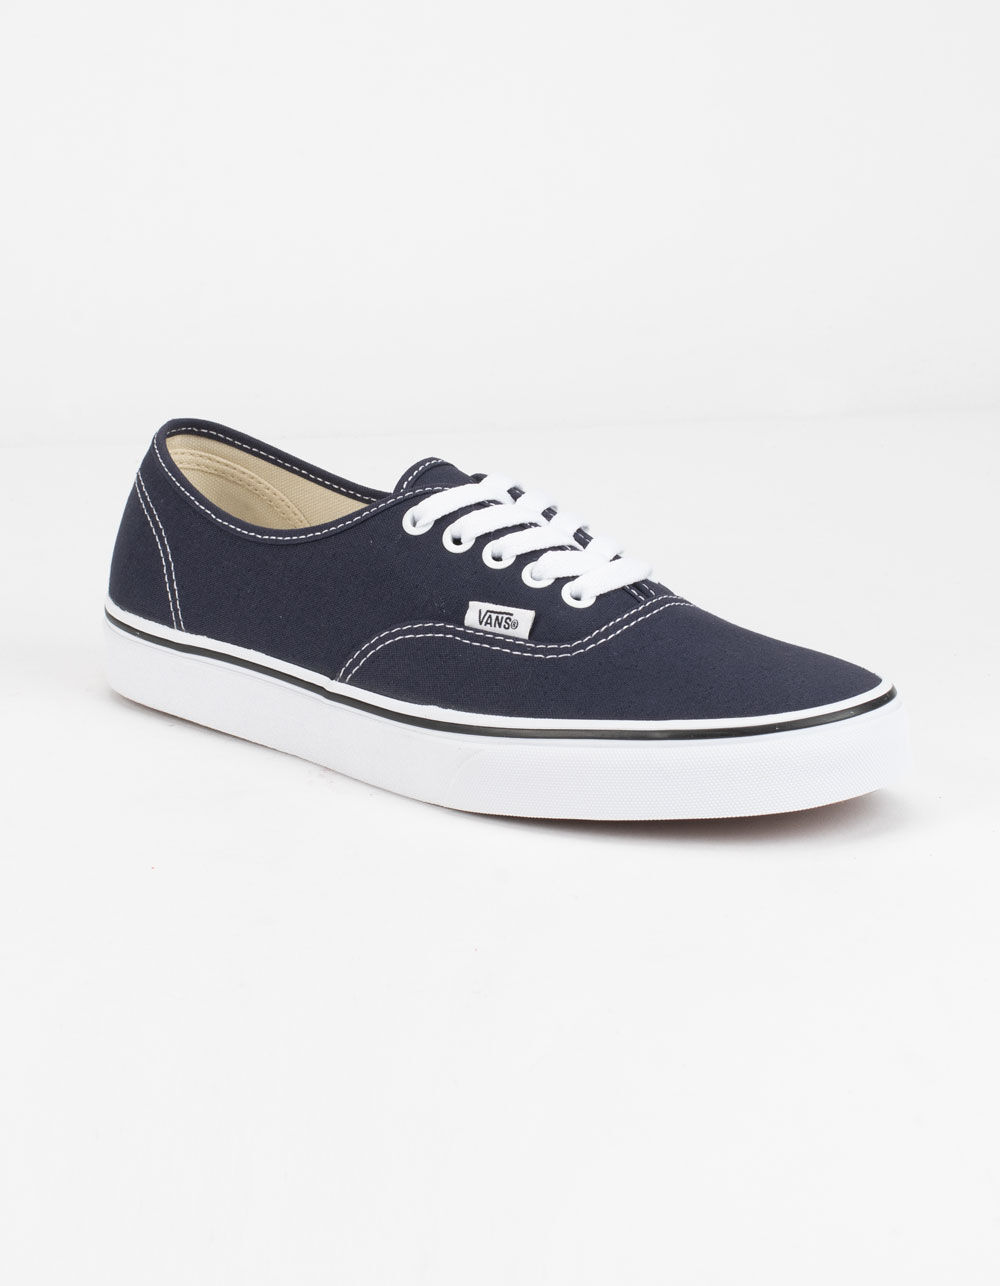 VANS Authentic Night Sky & True White Shoes image number 1